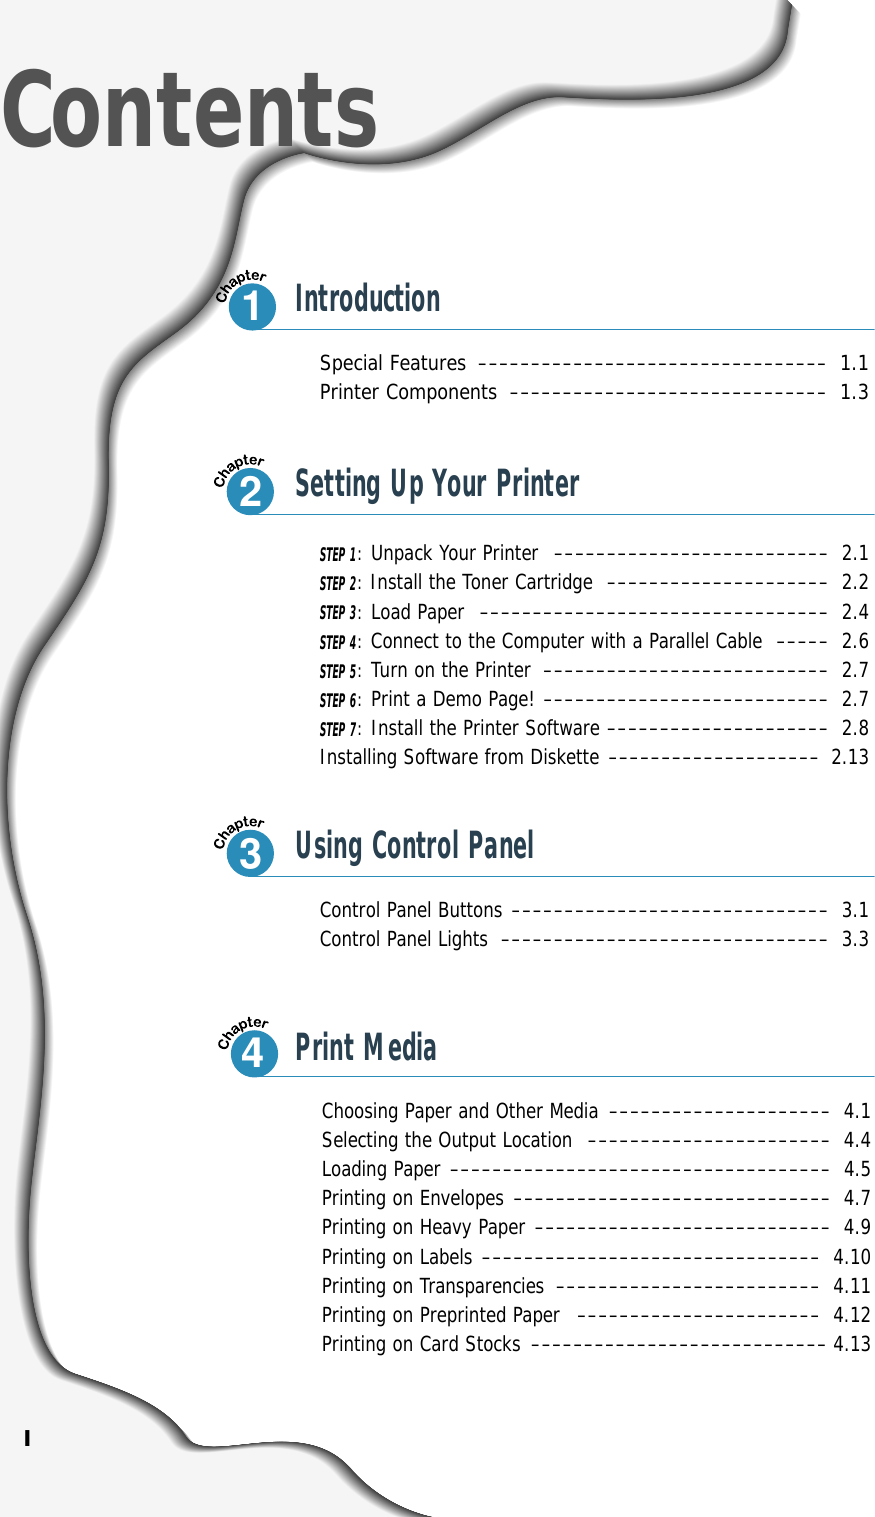 ISpecial Features –––––––––––––––––––––––––––––––––1.1Printer Components ––––––––––––––––––––––––––––––1.3Control Panel Buttons –––––––––––––––––––––––––––––– 3.1Control Panel Lights ––––––––––––––––––––––––––––––– 3.3ContentsIntroductionSTEP 1:Unpack Your Printer –––––––––––––––––––––––––– 2.1STEP 2:Install the Toner Cartridge ––––––––––––––––––––– 2.2STEP 3:Load Paper ––––––––––––––––––––––––––––––––– 2.4STEP 4:Connect to the Computer with a Parallel Cable ––––– 2.6STEP 5:Turn on the Printer ––––––––––––––––––––––––––– 2.7STEP 6:Print a Demo Page! ––––––––––––––––––––––––––– 2.7STEP 7:Install the Printer Software ––––––––––––––––––––– 2.8Installing Software from Diskette –––––––––––––––––––– 2.13Choosing Paper and Other Media ––––––––––––––––––––– 4.1Selecting the Output Location ––––––––––––––––––––––– 4.4Loading Paper –––––––––––––––––––––––––––––––––––– 4.5Printing on Envelopes –––––––––––––––––––––––––––––– 4.7Printing on Heavy Paper –––––––––––––––––––––––––––– 4.9Printing on Labels –––––––––––––––––––––––––––––––– 4.10Printing on Transparencies ––––––––––––––––––––––––– 4.11Printing on Preprinted Paper ––––––––––––––––––––––– 4.12Printing on Card Stocks –––––––––––––––––––––––––––– 4.1312Setting Up Your Printer3Using Control Panel4Print Media